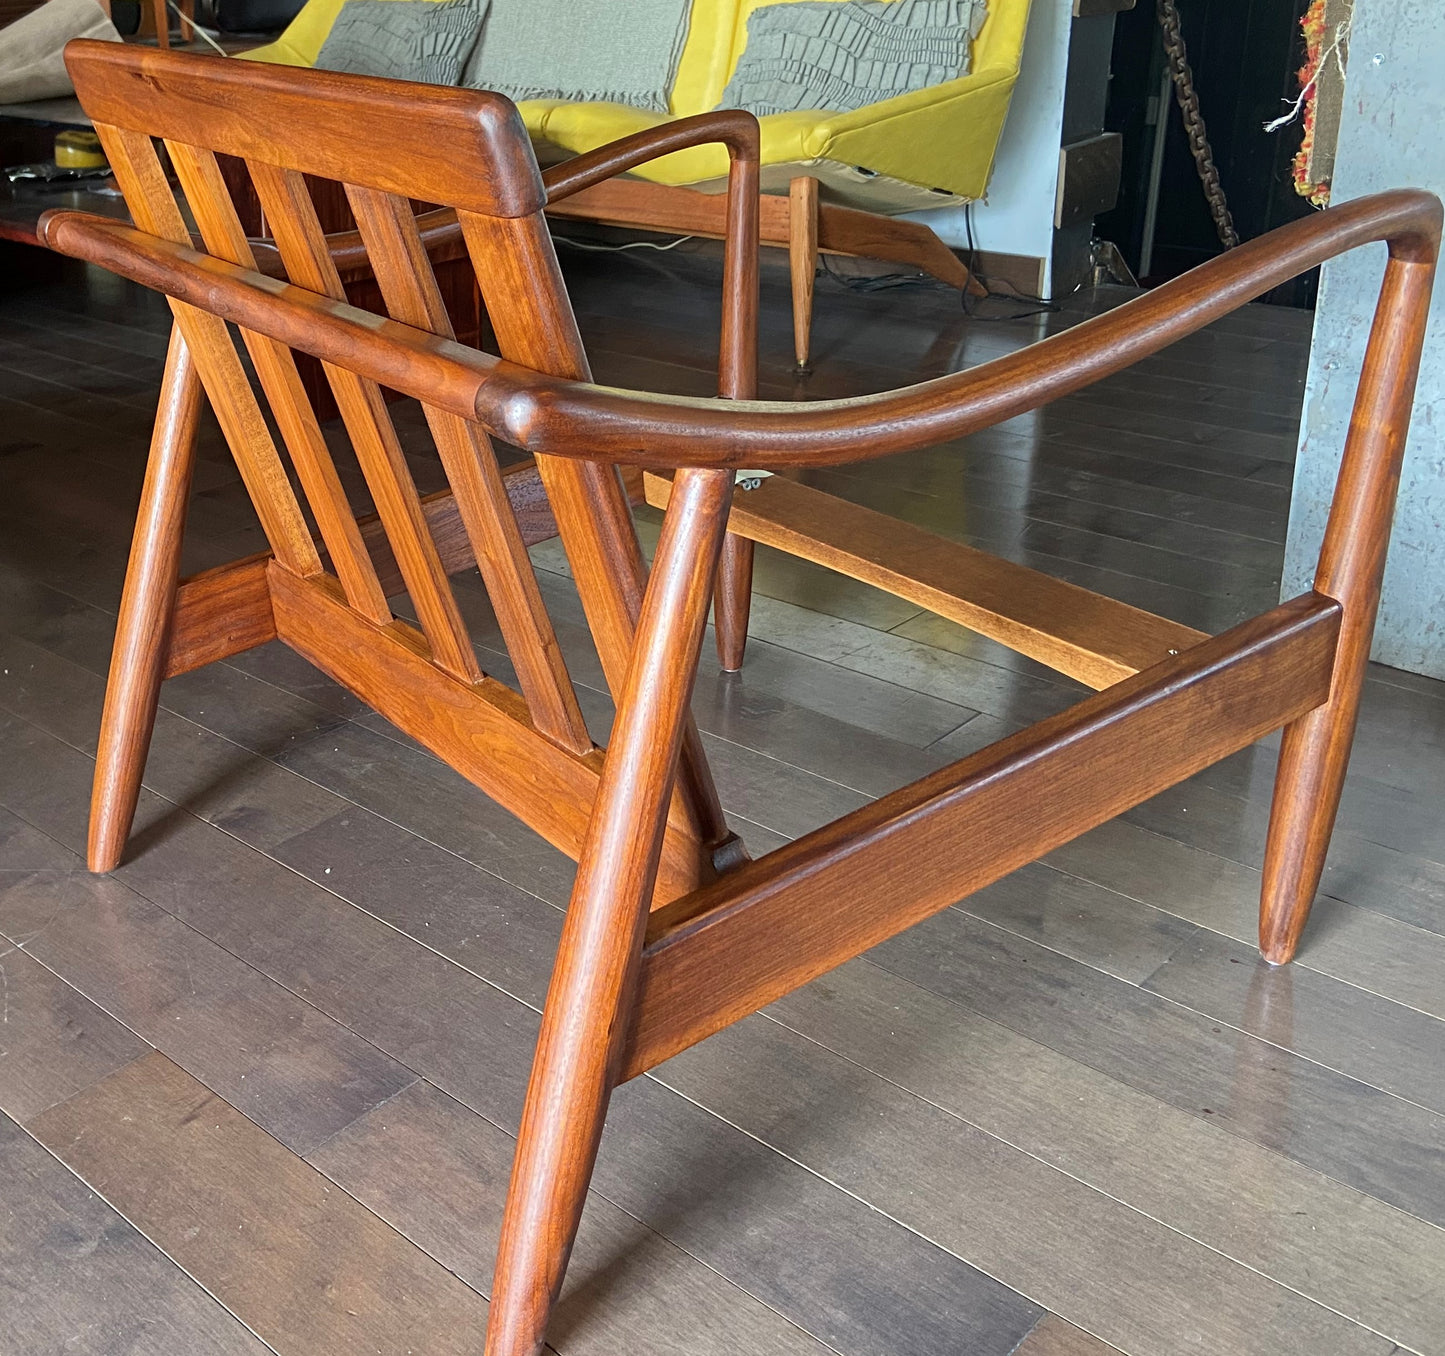 REFINISHED MCM Lounge Chair PERFECT